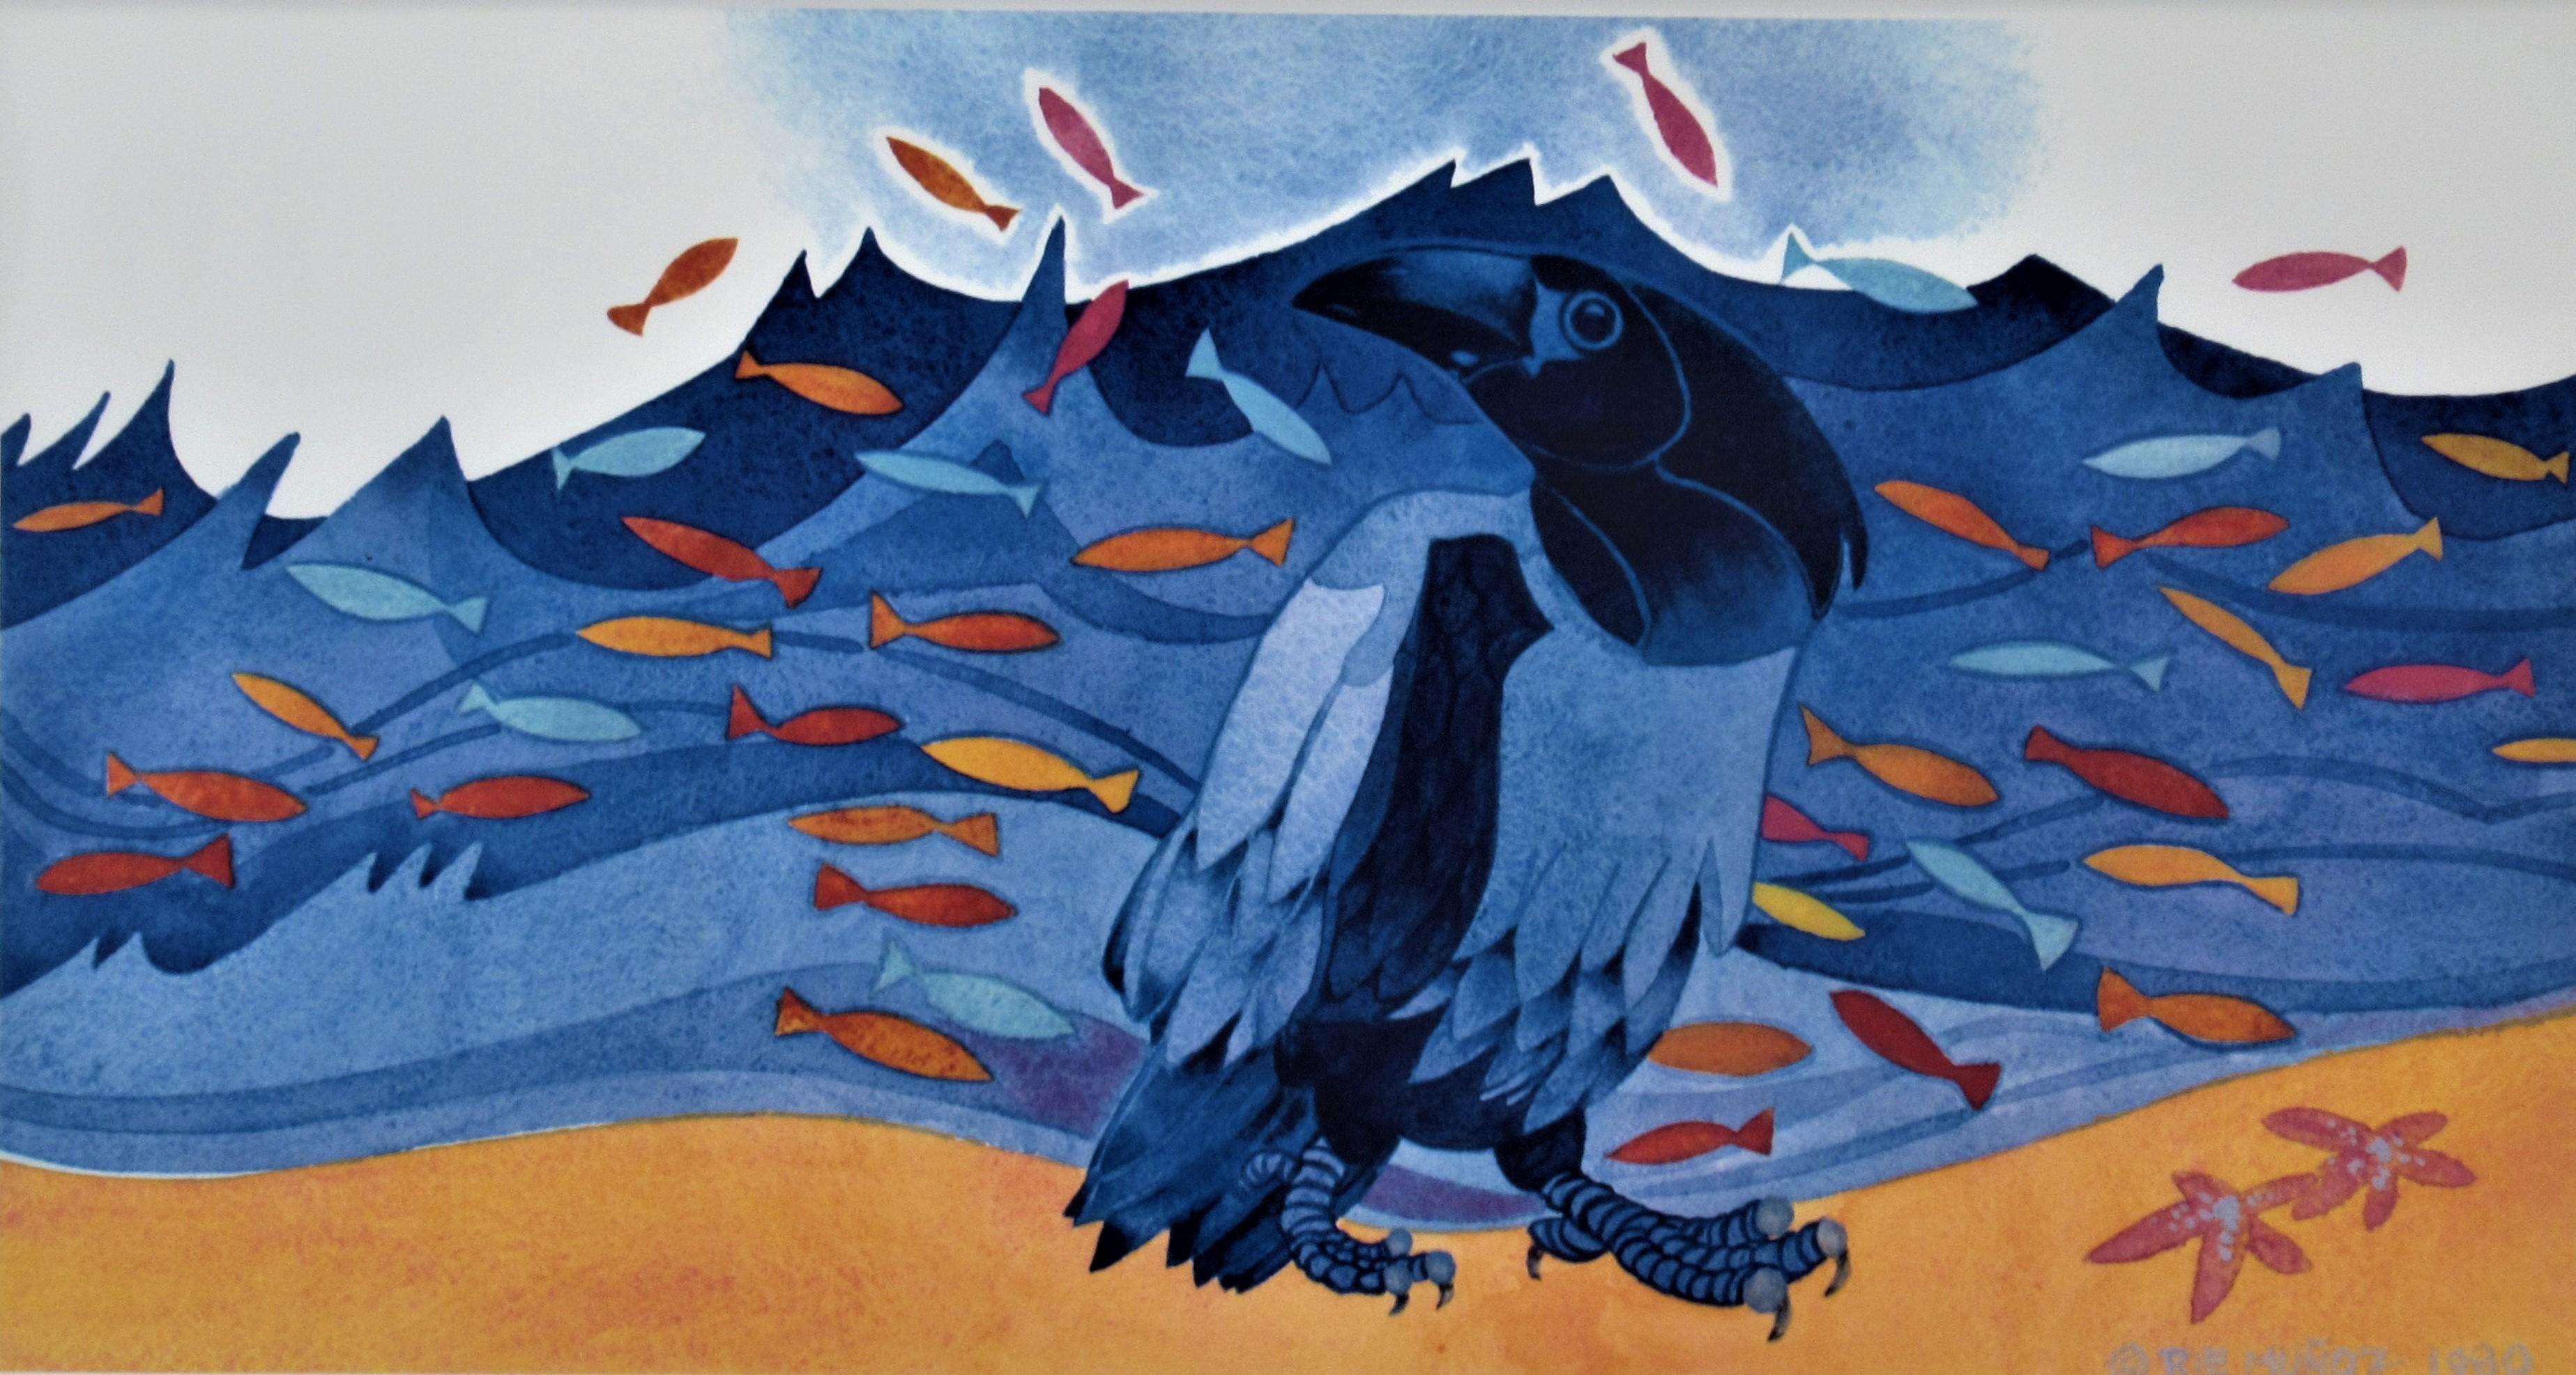 Raven and Herring - Print by Rie Munoz